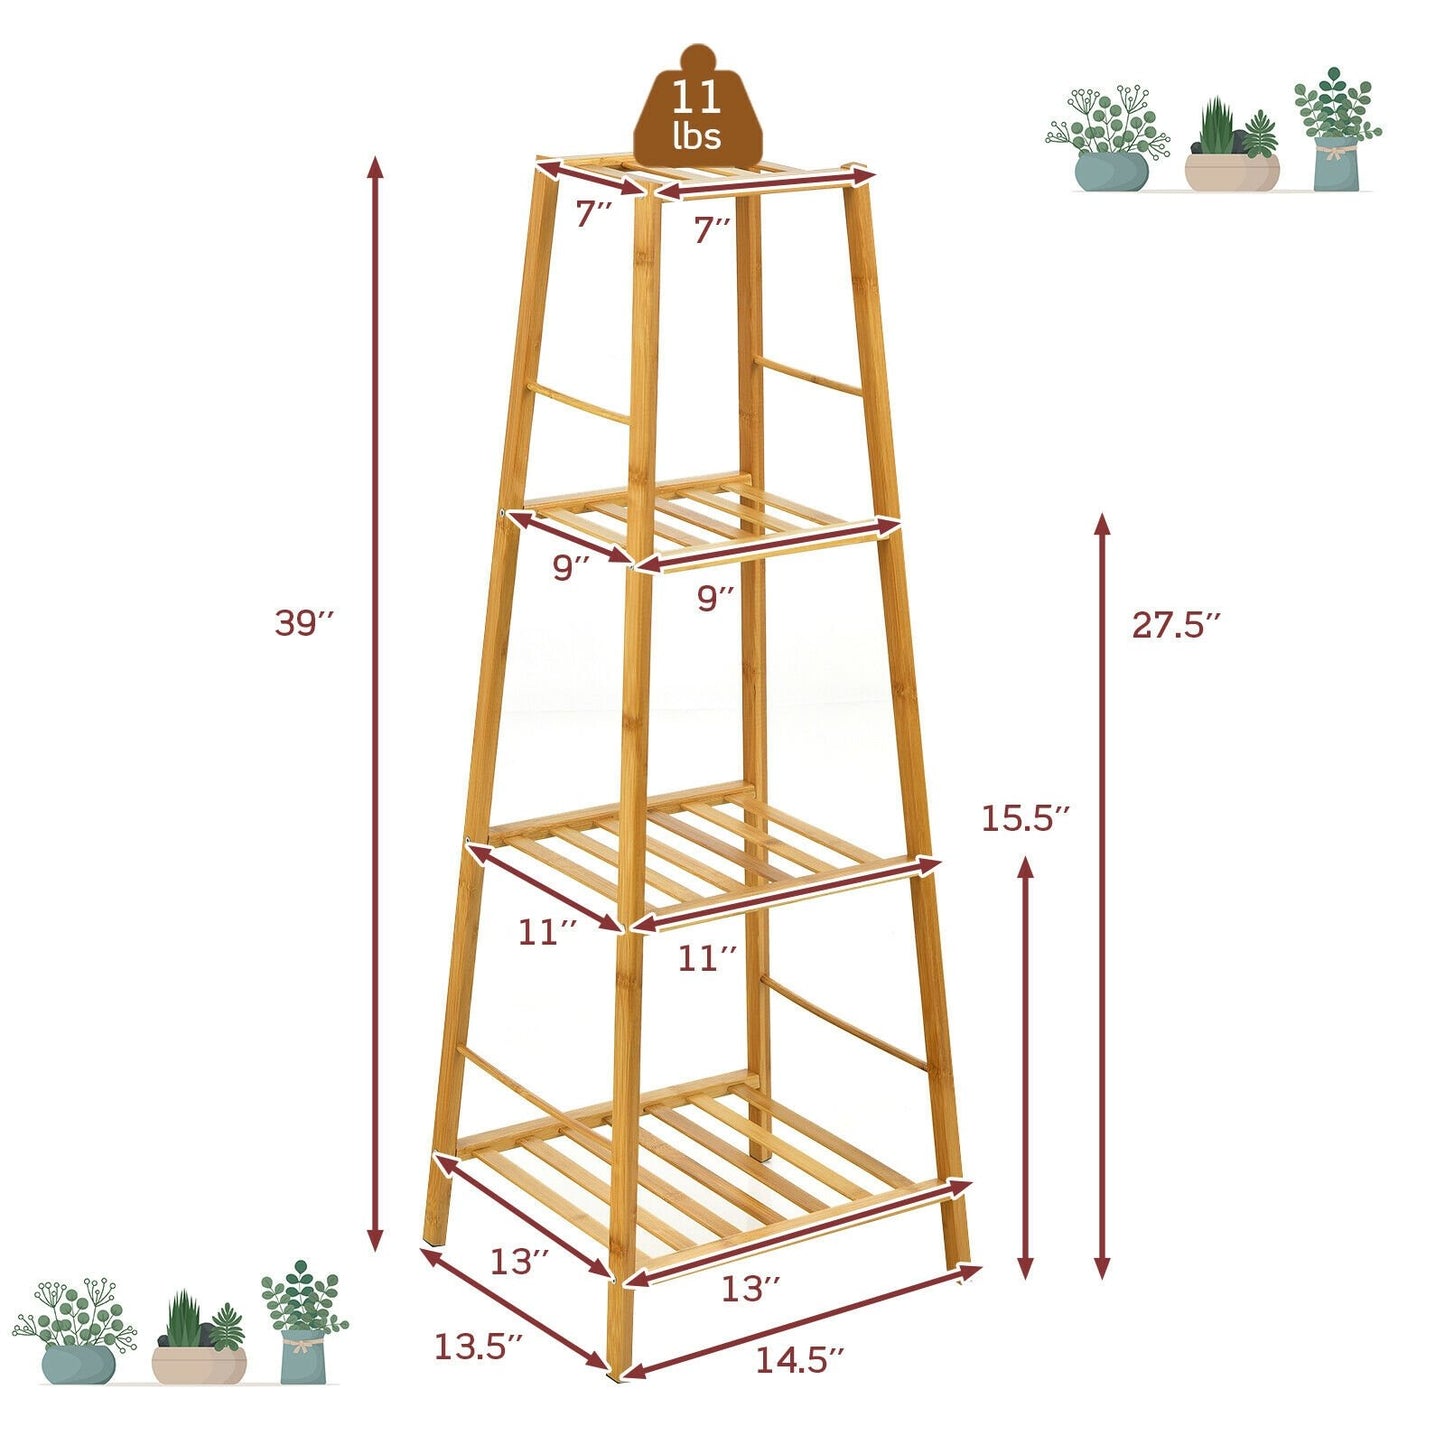 4-Potted Bamboo Tall Plant Holder Stand, Natural